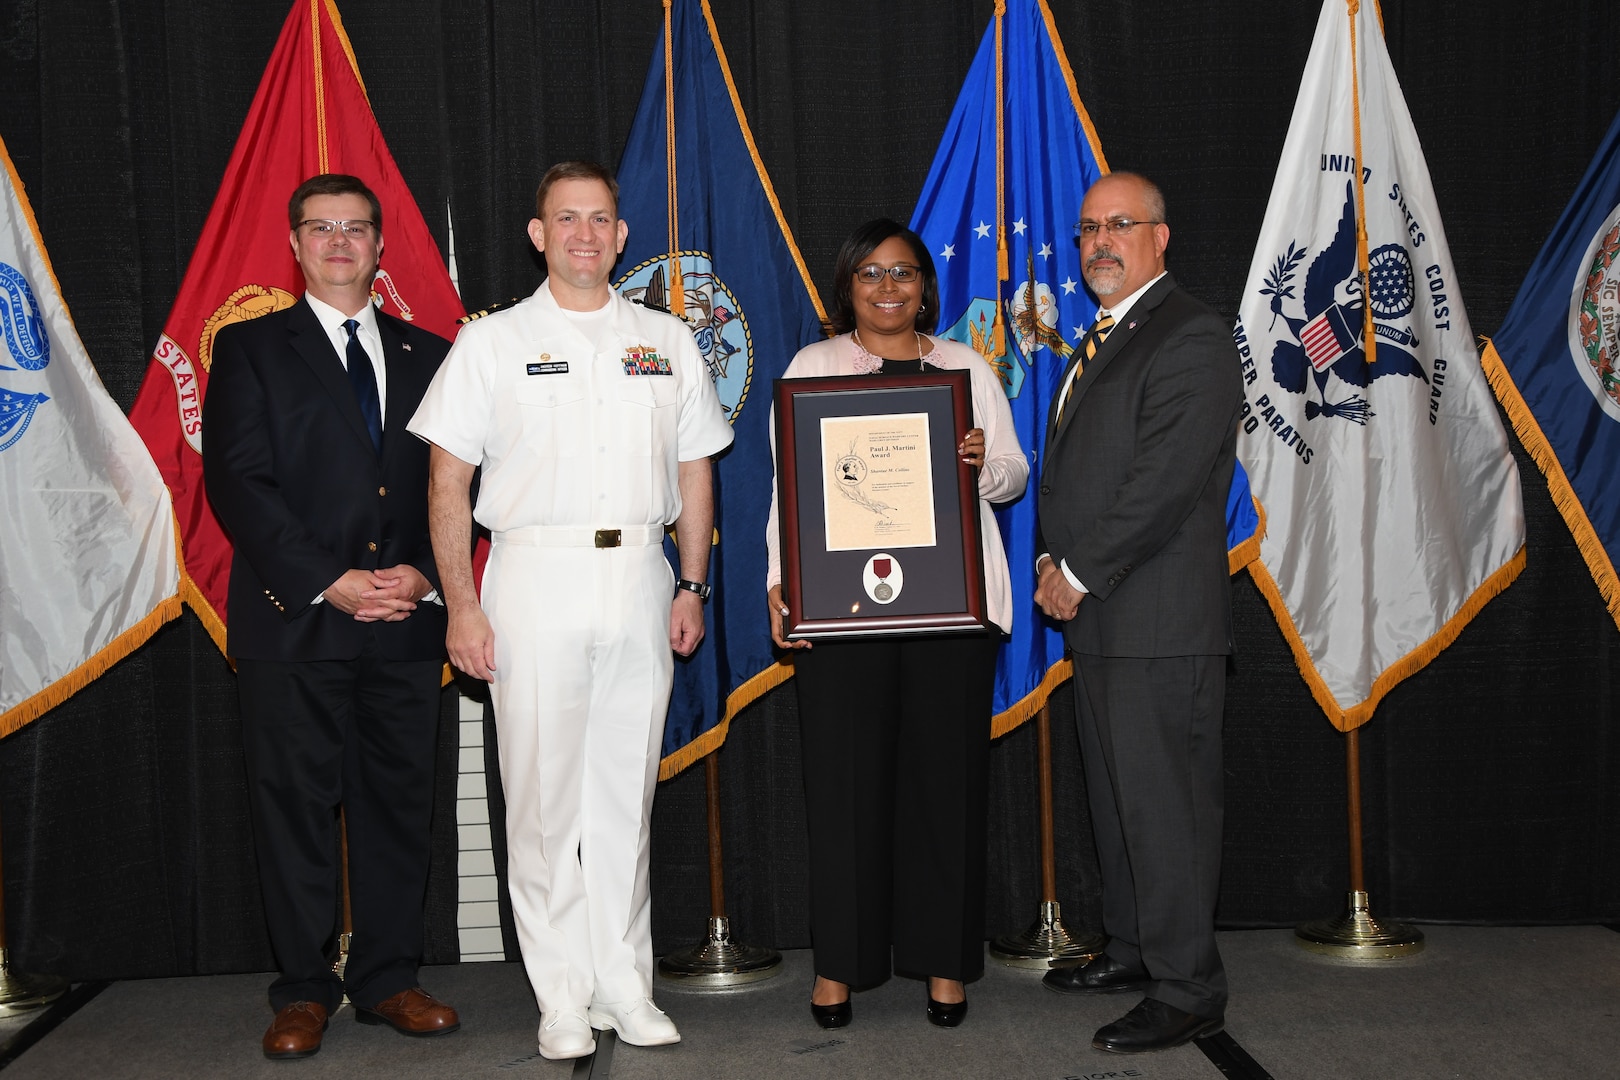 IMAGE: Shantae Collins is presented the Paul J. Martini Award at Naval Surface Warfare Center Dahlgren Division's annual awards ceremony, Apr. 26 at the Fredericksburg Expo and Conference Center.

The award is named in honor of Paul J. Martini, who was head of the Engineering Support Directorate of the Naval Ordnance Laboratory from November 1951 to December 1973.